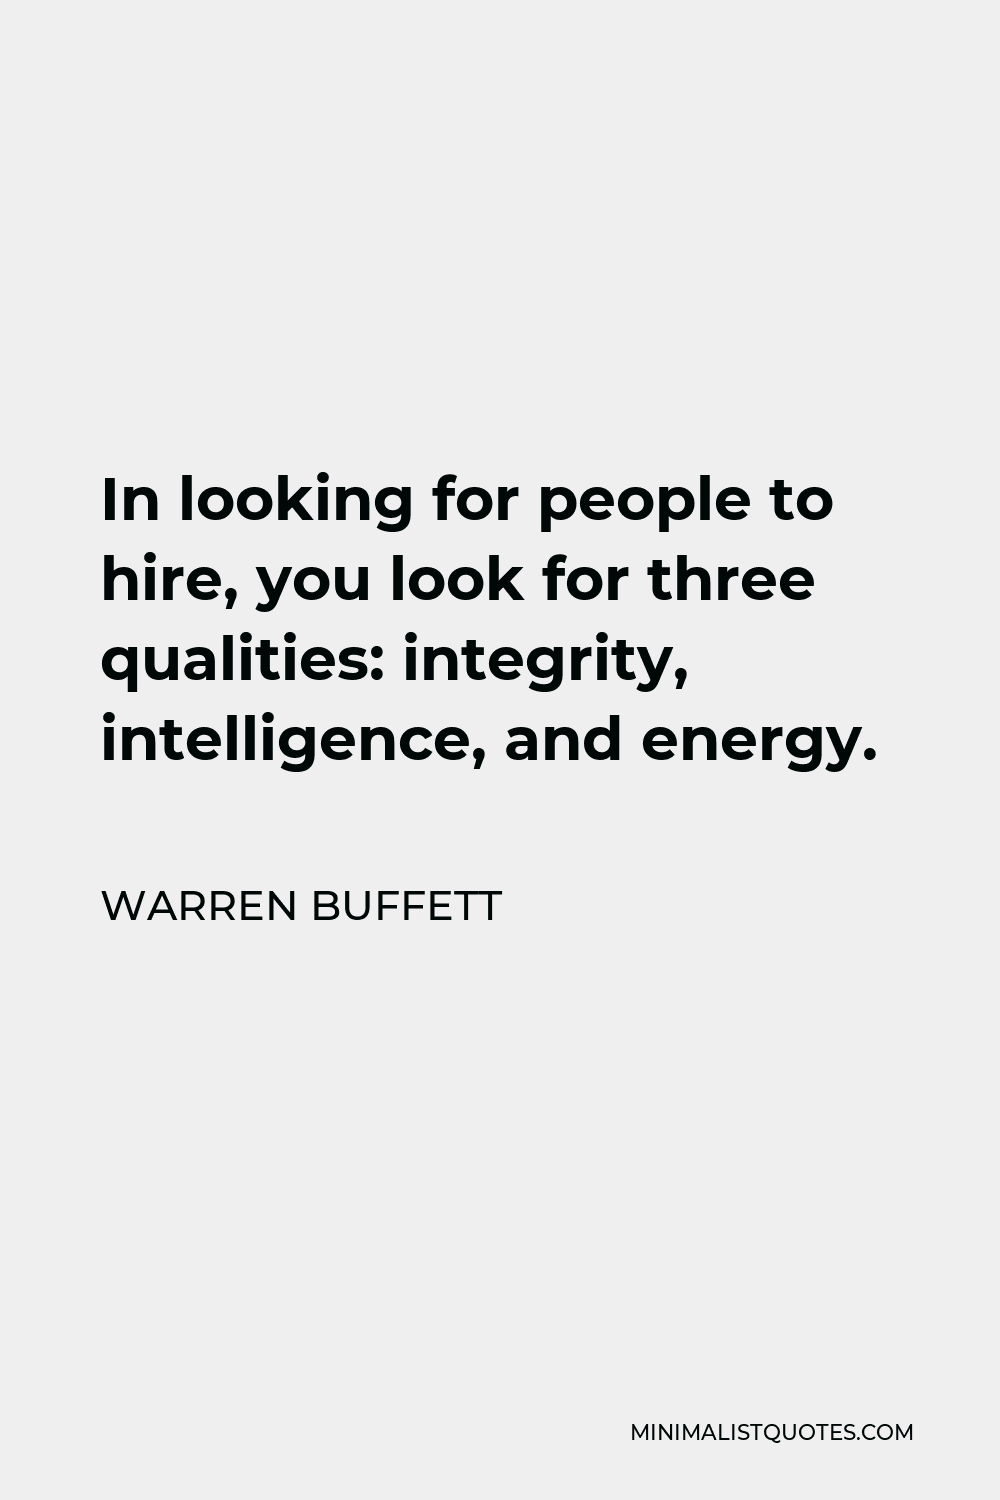 Warren Buffett Quote - In looking for people to hire, you look for three qualities: integrity, intelligence, and energy.